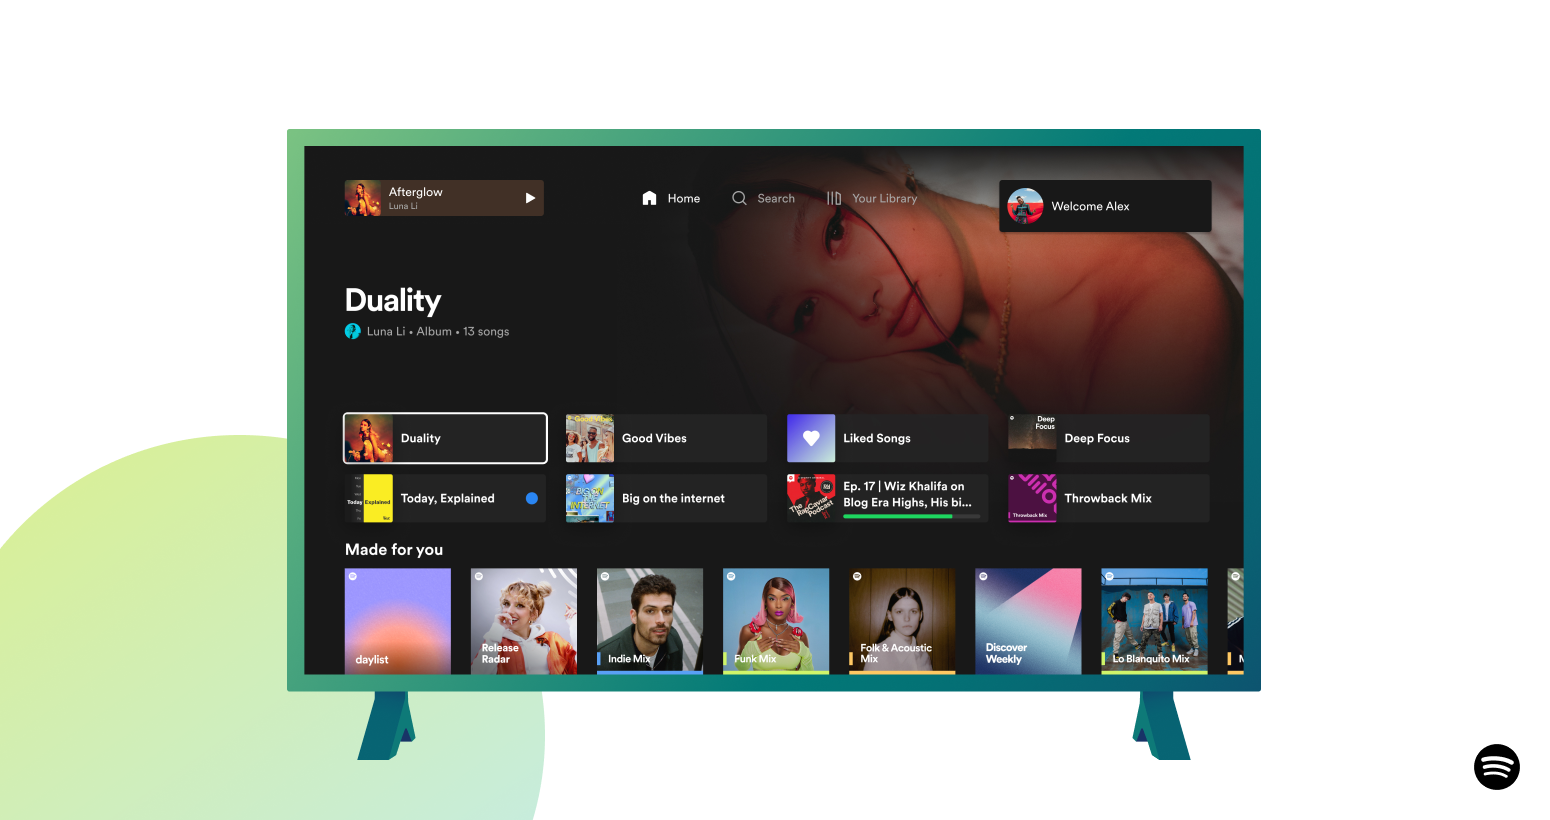 Find Your Favorite Audio More Easily With the Redesigned Spotify on TV  Experience — Spotify